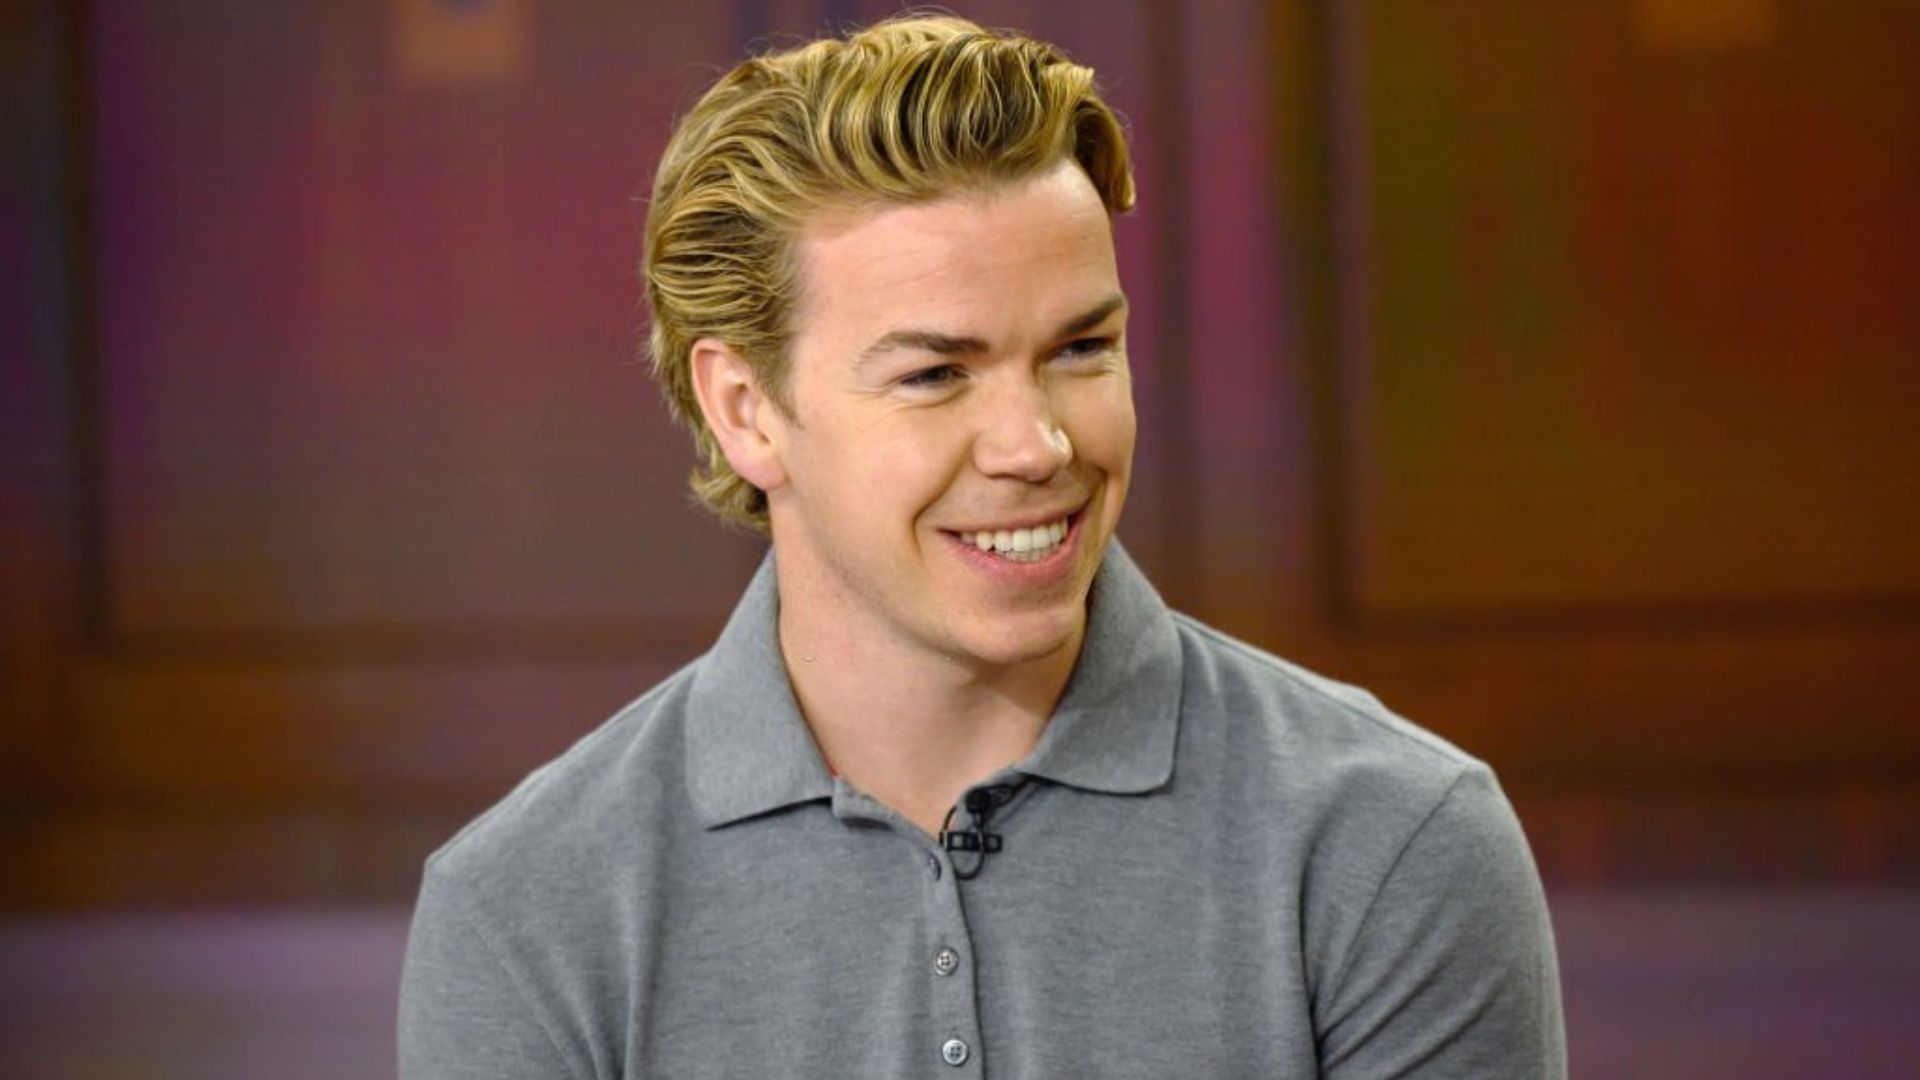 Will Poulter Plastic Surgery: Did He Go Under the Knife?